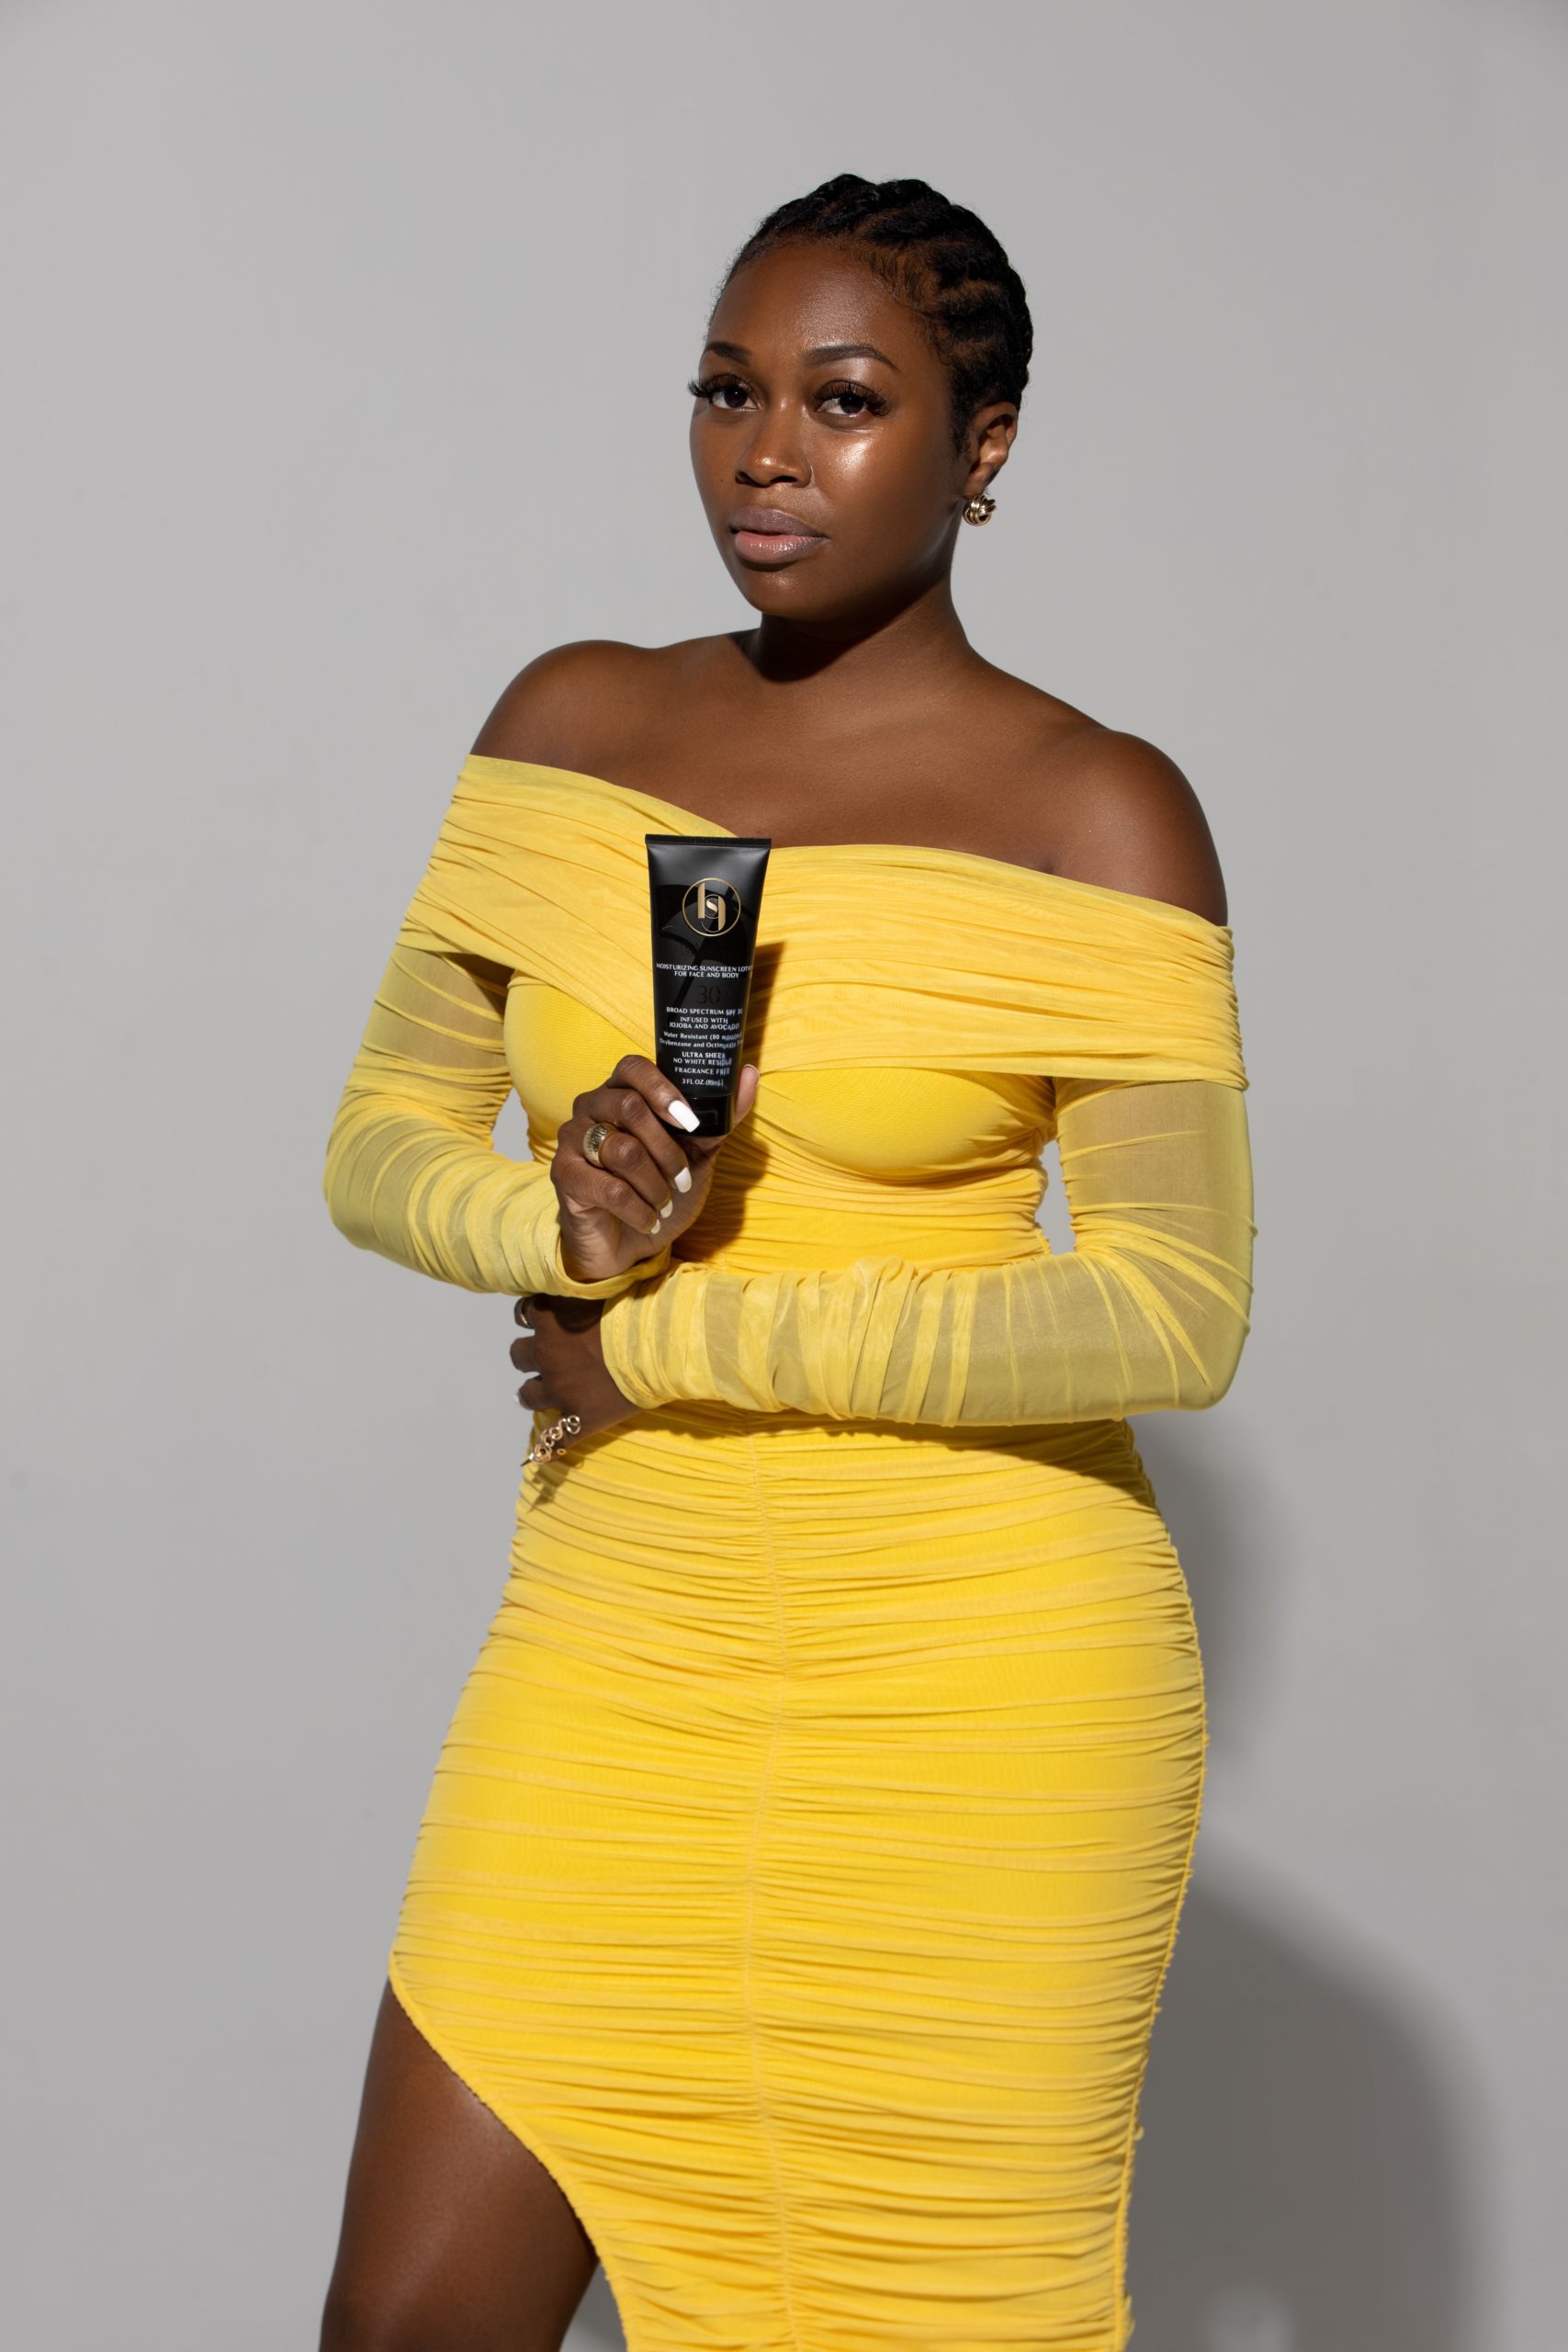 Shontay Lundy of Black Girl Sunscreen on Successful Business Branding